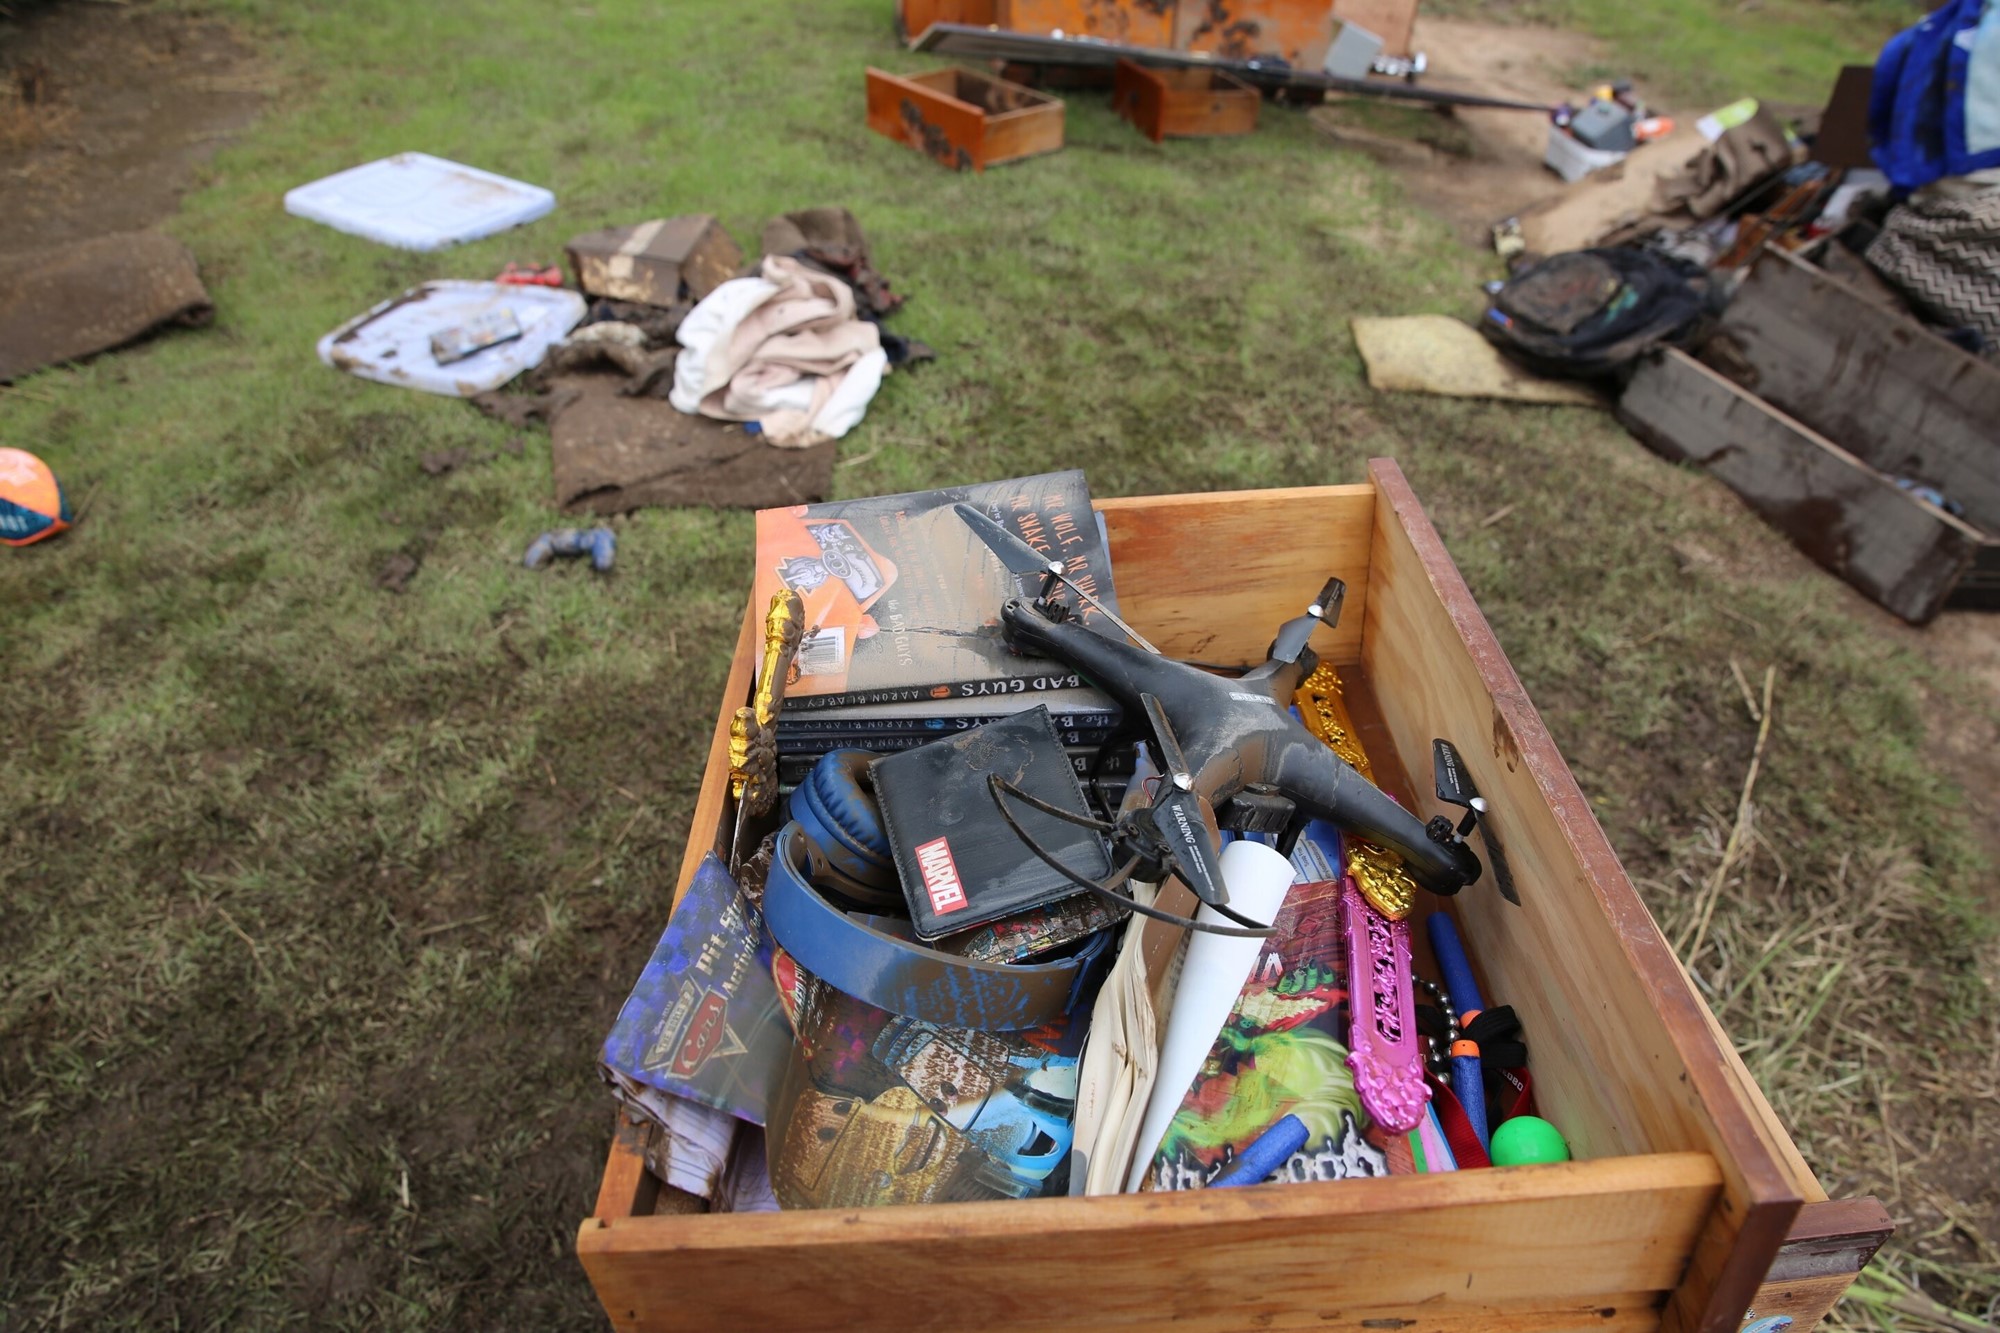 A draw full of water damaged items sits on the lawn